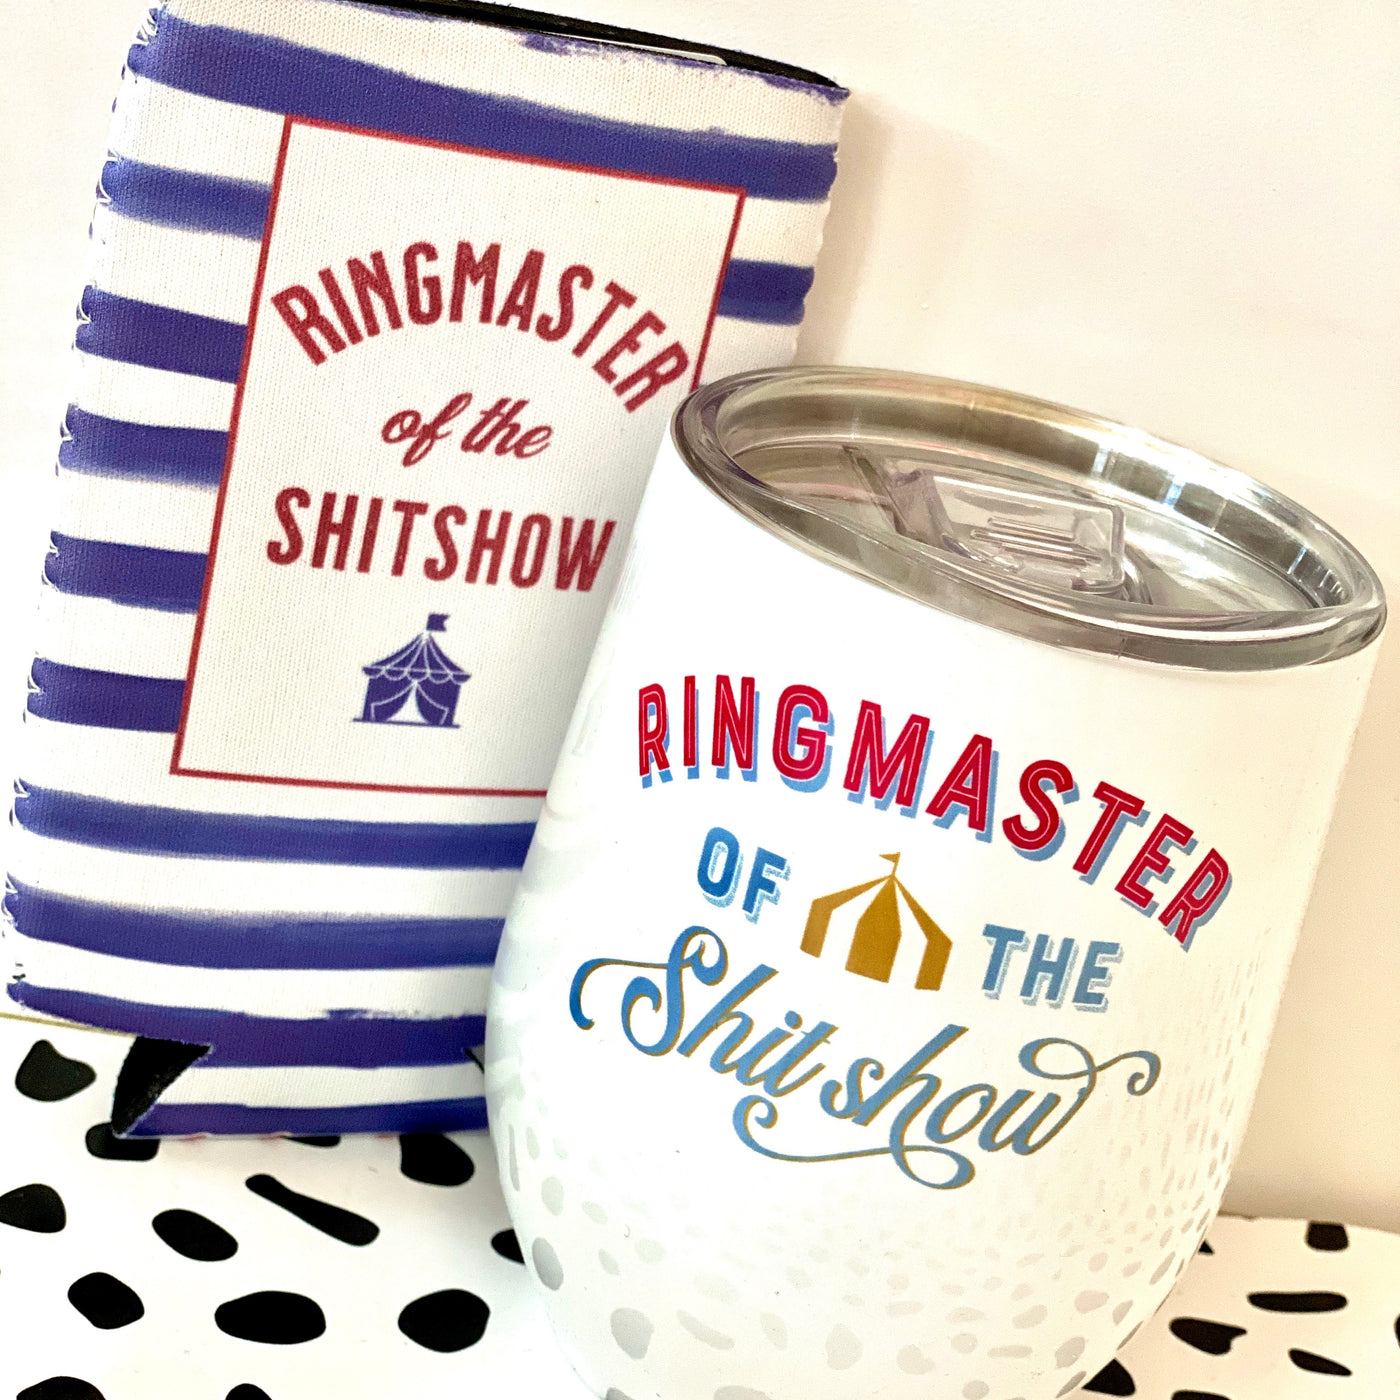 Ringmaster Of The Shit Show Travel Wine Cup